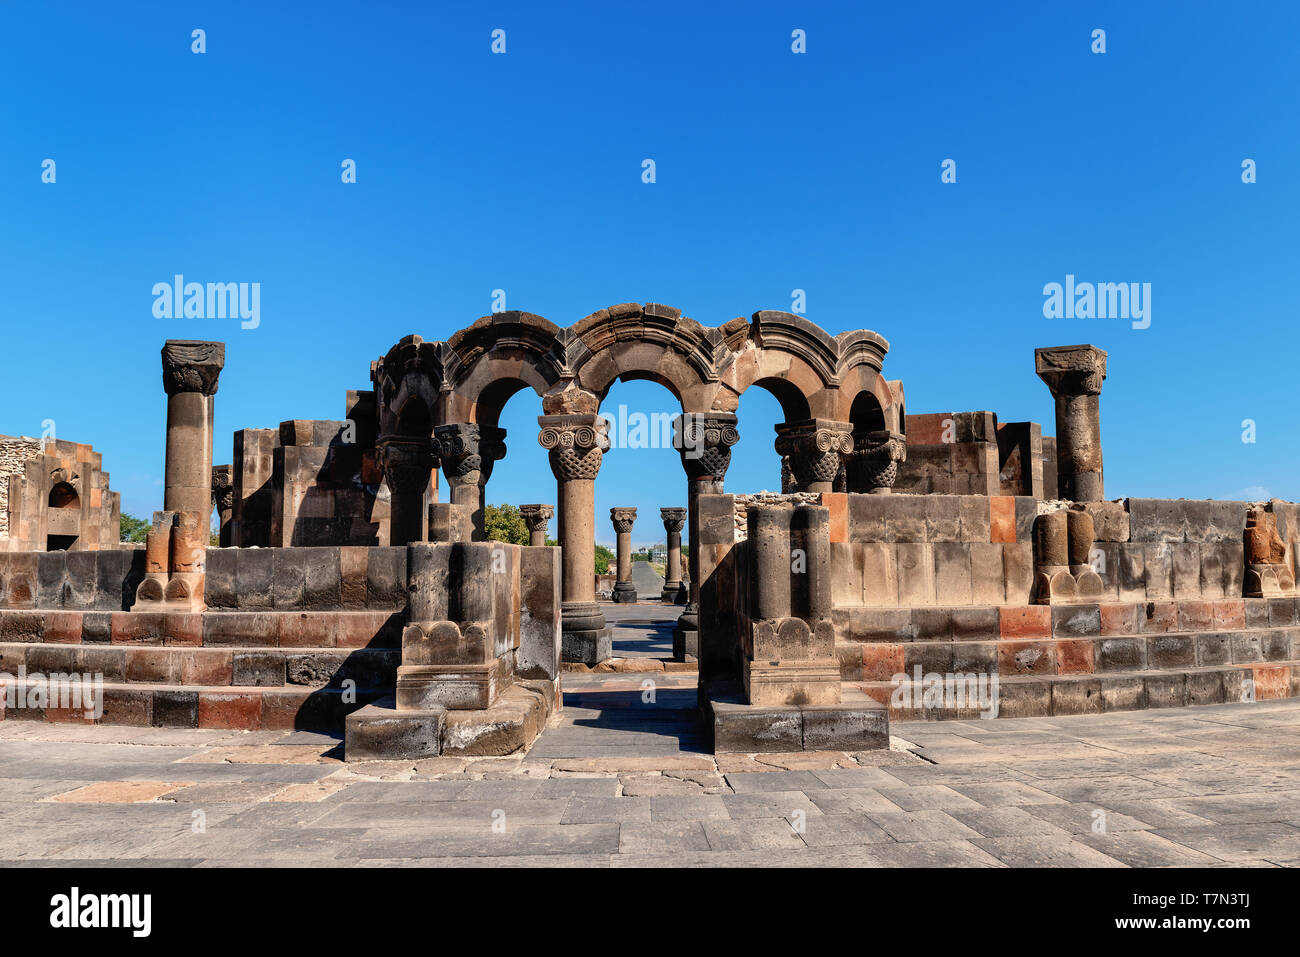 Ruins of the Temple of Zvartnots with blue sky in background, Yerevan, Armenia Stock Photo